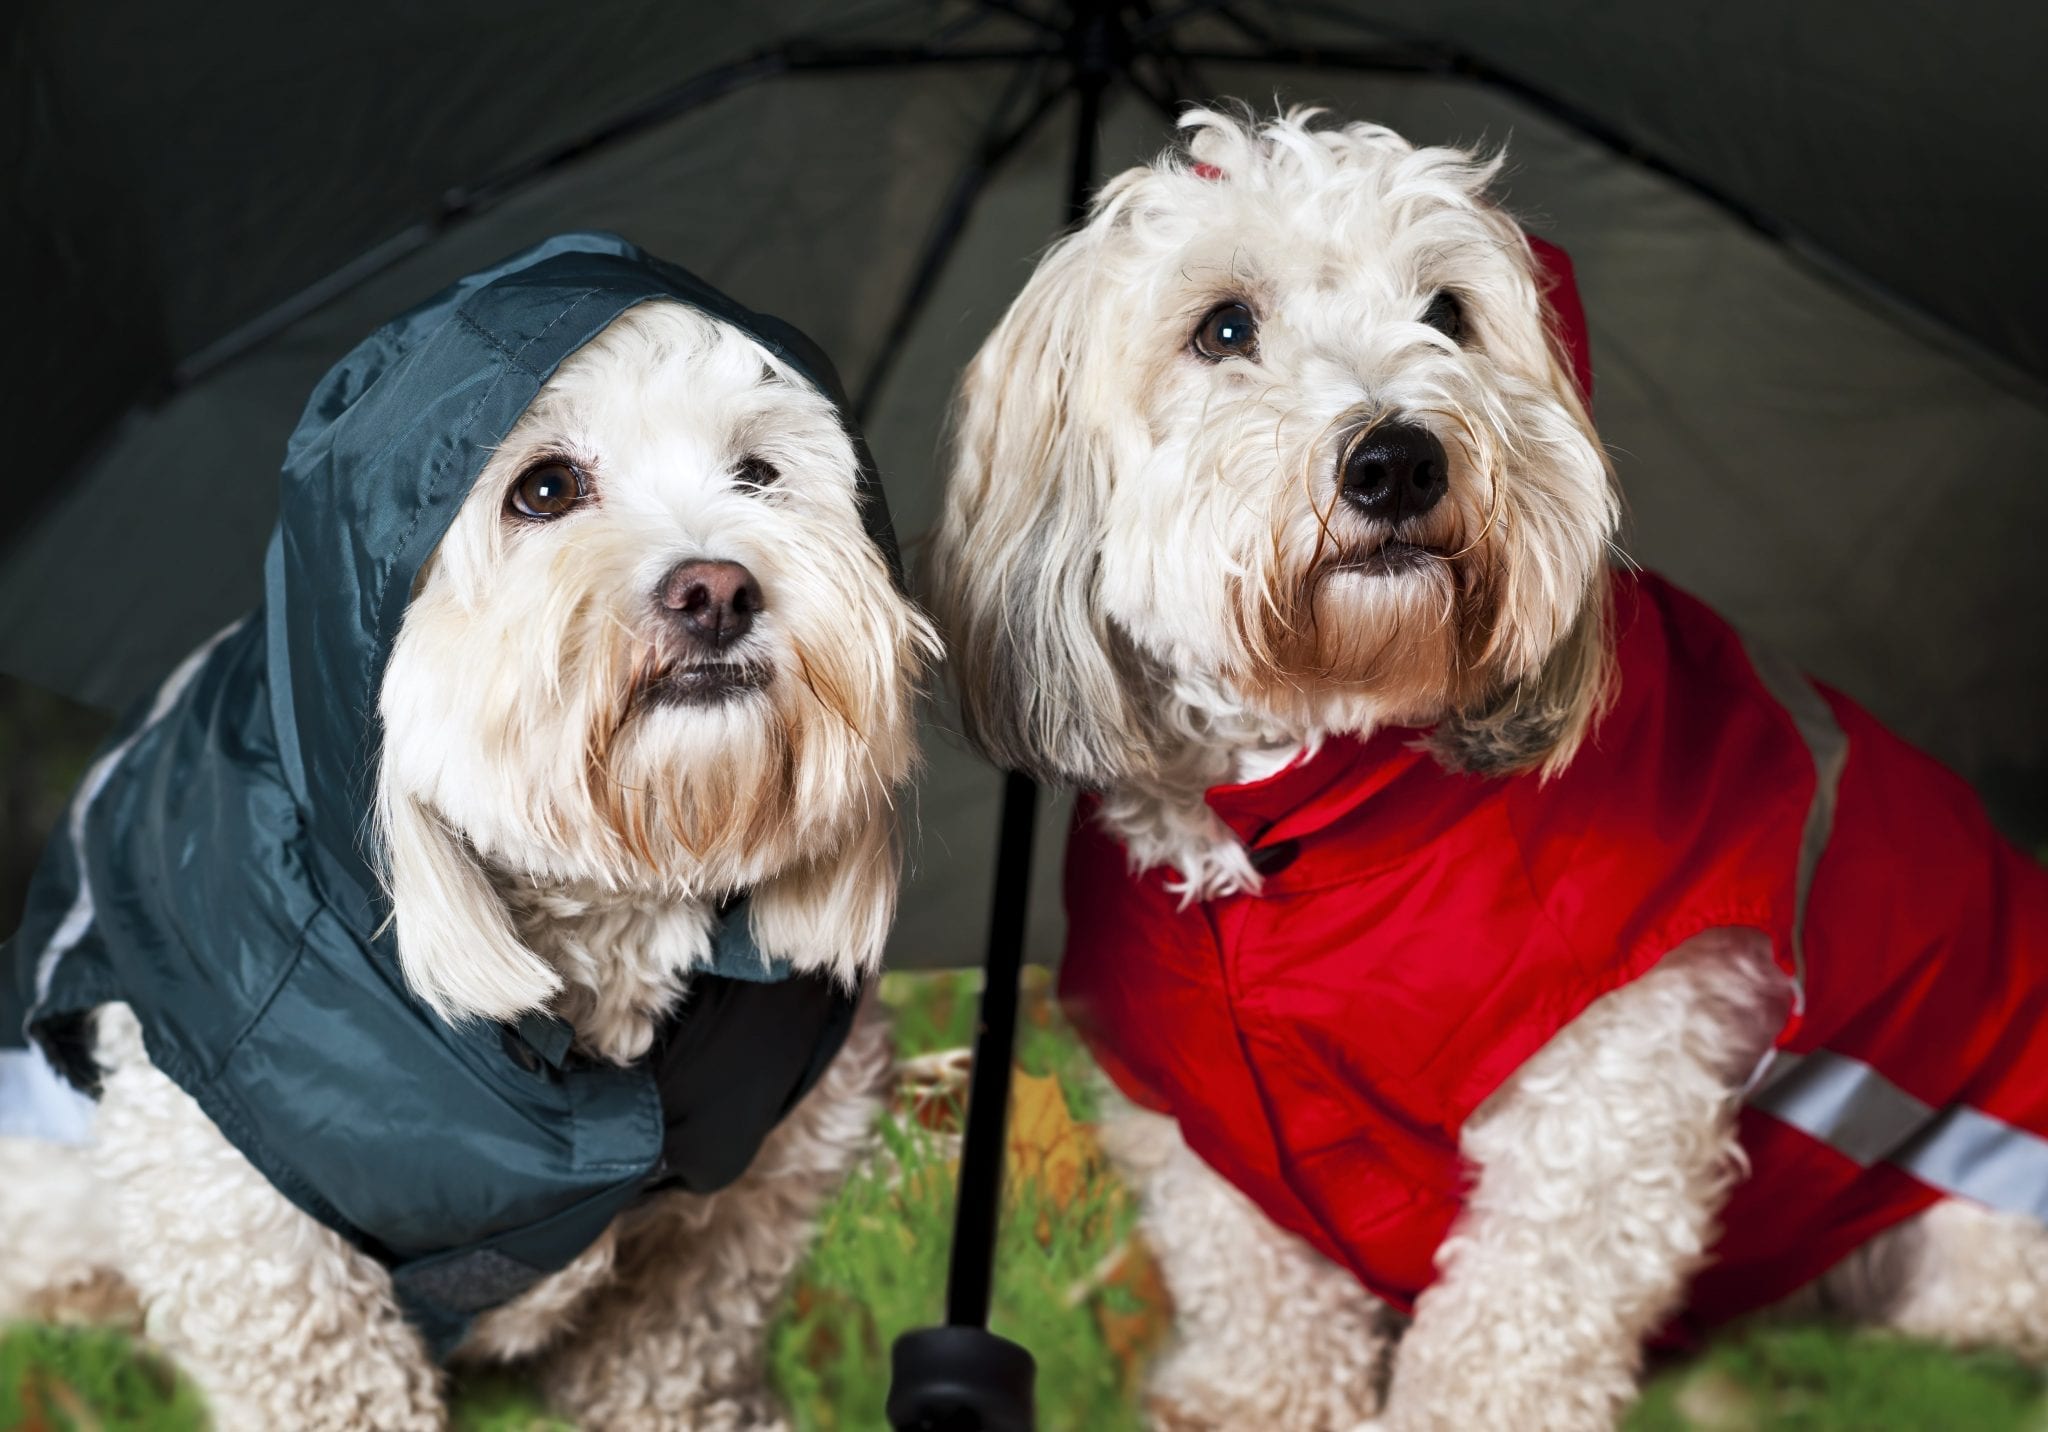 21 Fun Ways To Keep Your Dog Busy Indoors on a Rainy Day - Puppy In Training